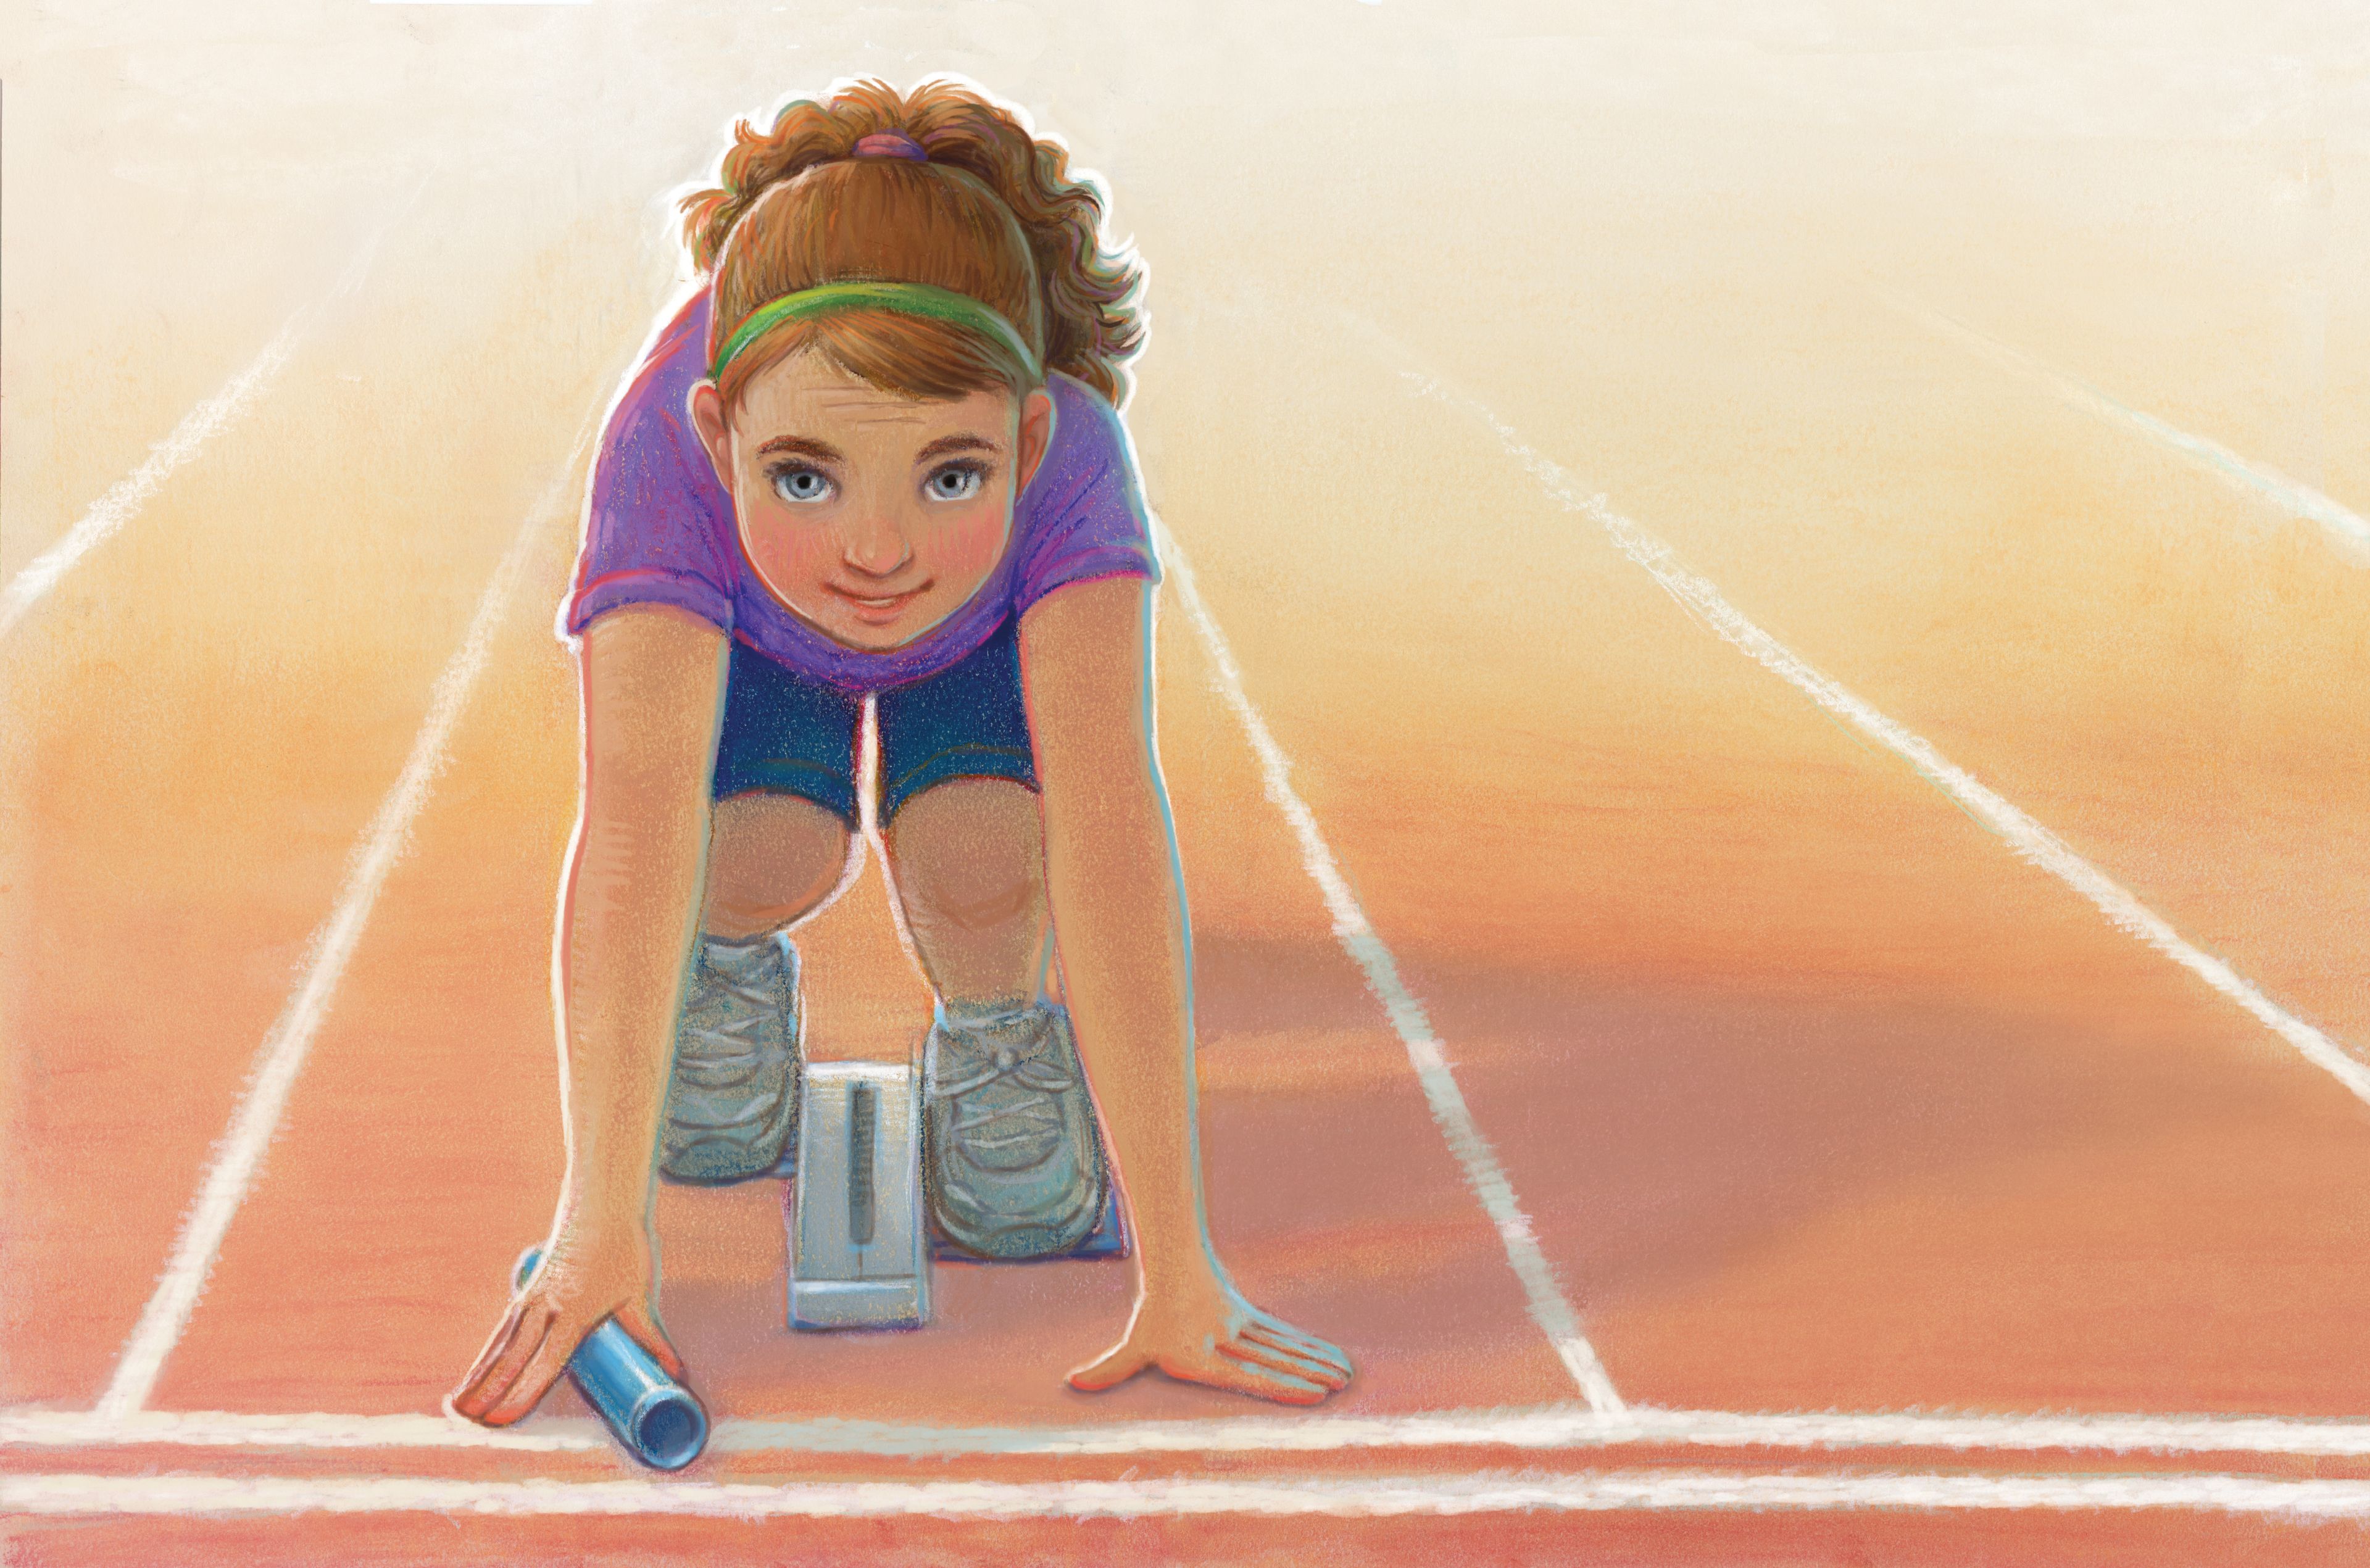 A girl crouches down on her lane on a running track and waits to begin the race.